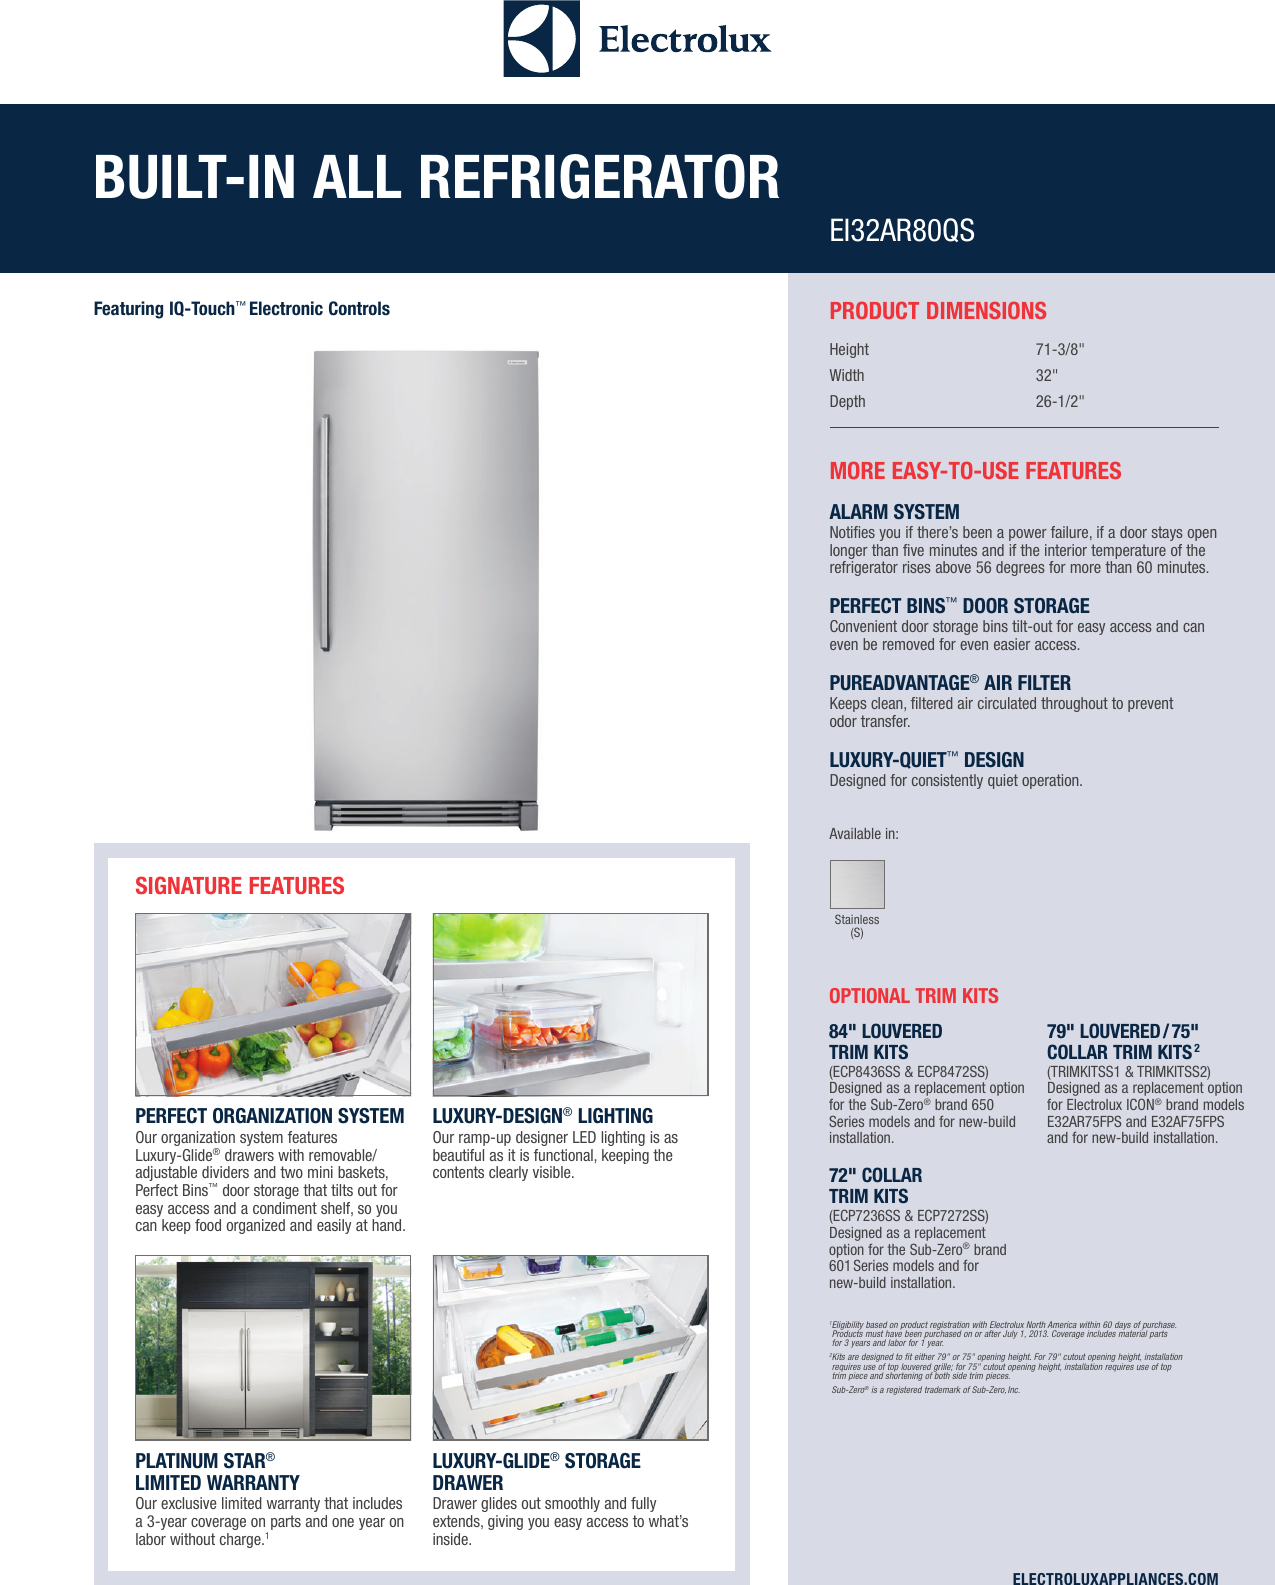 Page 1 of 4 - Electrolux Electrolux-Built-In-All-Refrigerator-With-Iq-Touch-Controls-Ei32Ar80Qs-Product-Specifications-Sheet-  Electrolux-built-in-all-refrigerator-with-iq-touch-controls-ei32ar80qs-product-specifications-sheet